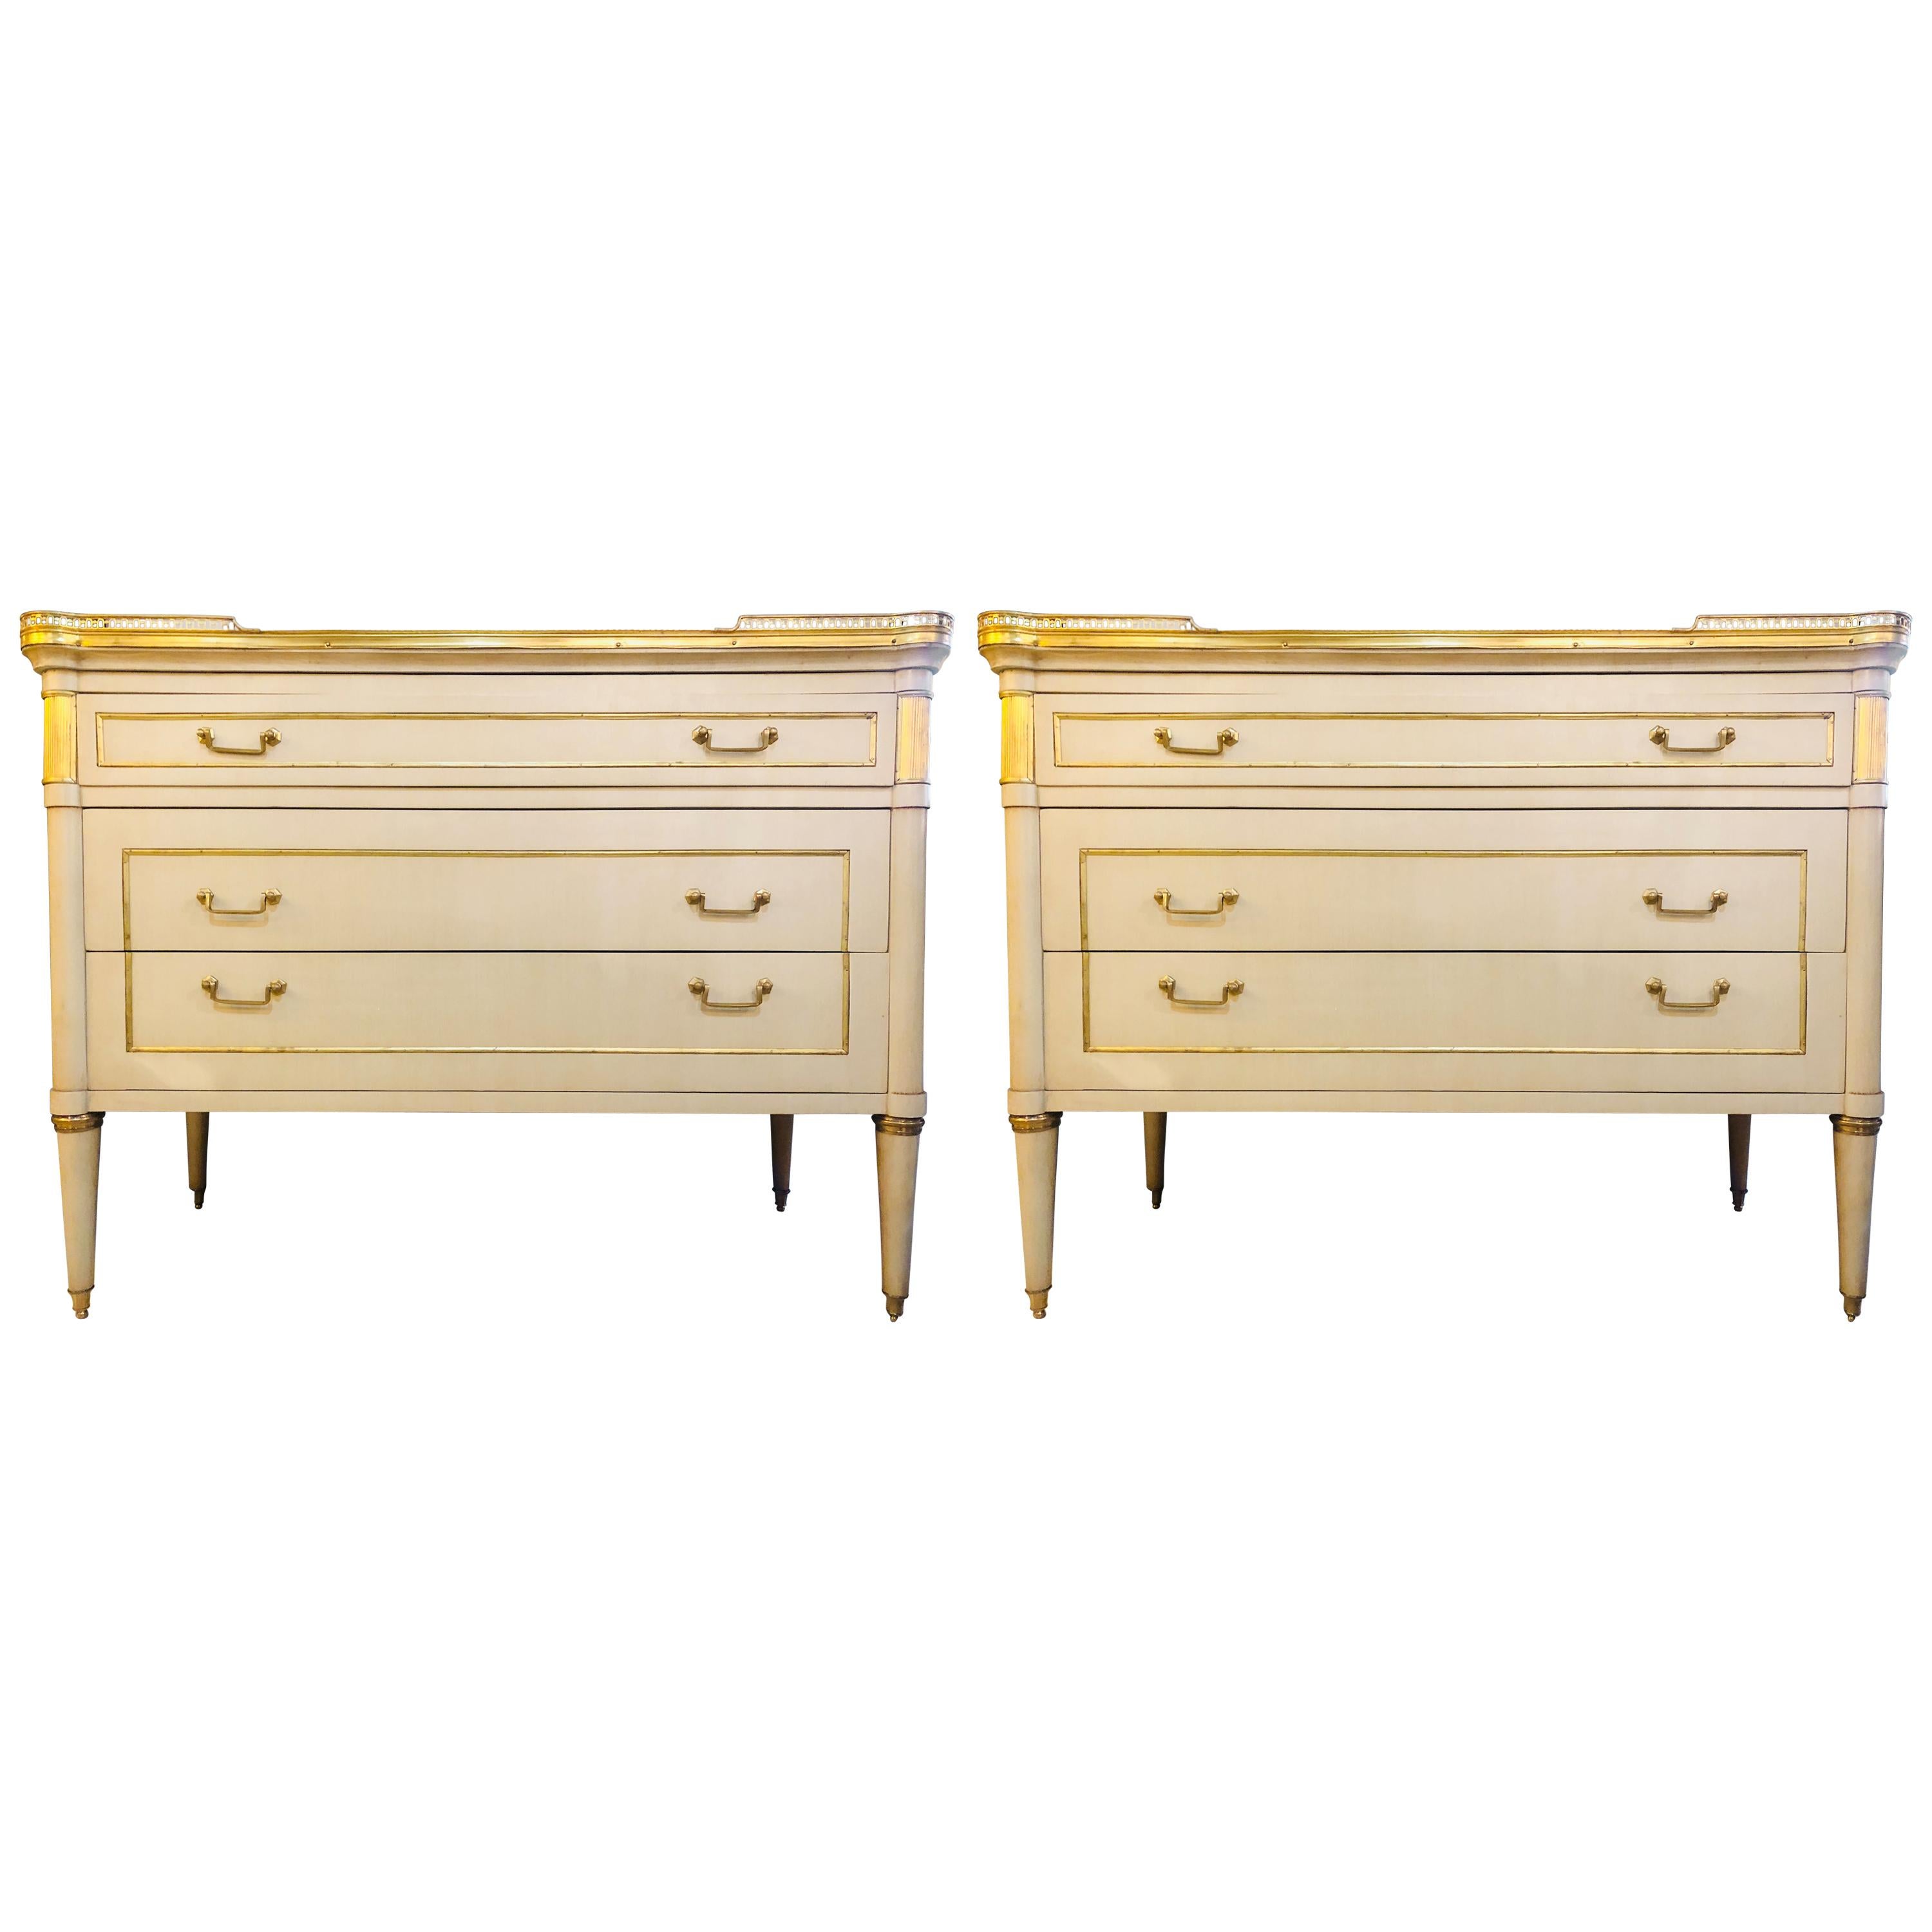 Pair of Maison Jansen style Hollywood Regency marble top mounted cream commodes.
This is a stunning pair of large and impressive paint decorated bronze mounted commodes, nightstands or sideboards in the manner of Maison Jansen that have all the